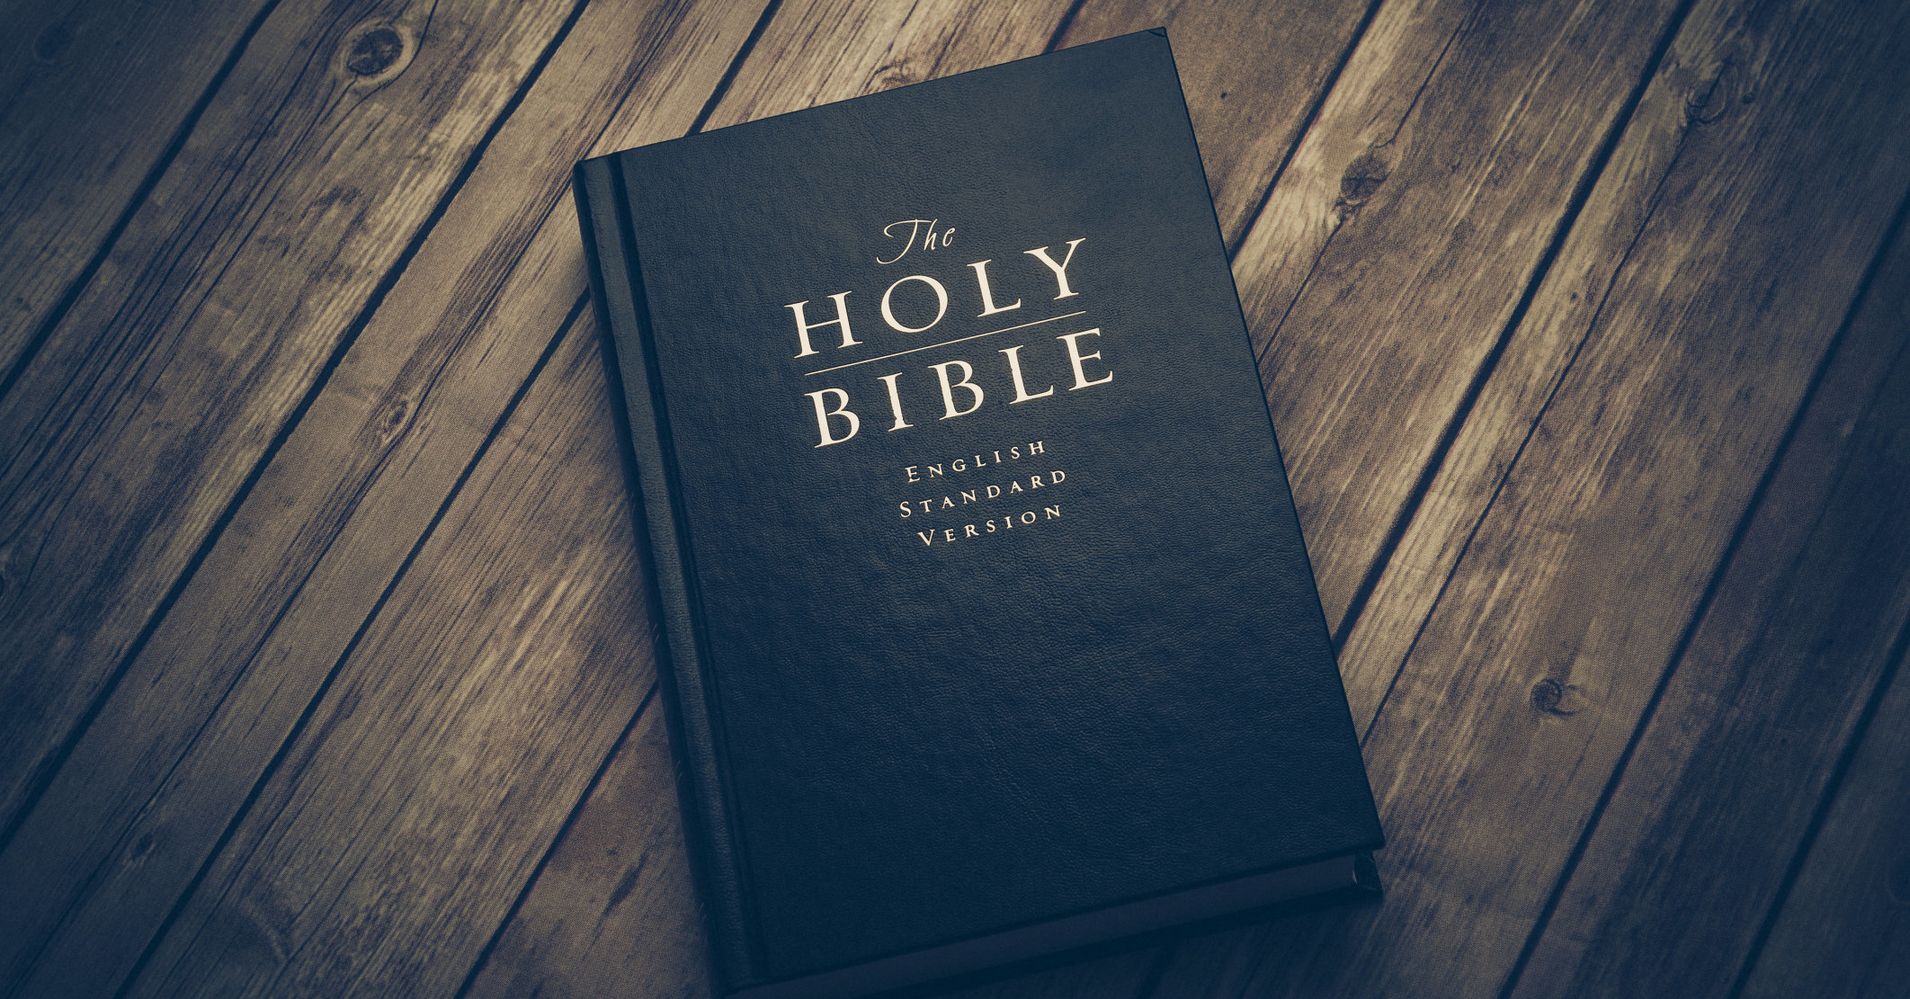 The Holy Bible Is Now One Of The Most Challenged Books In America | HuffPost